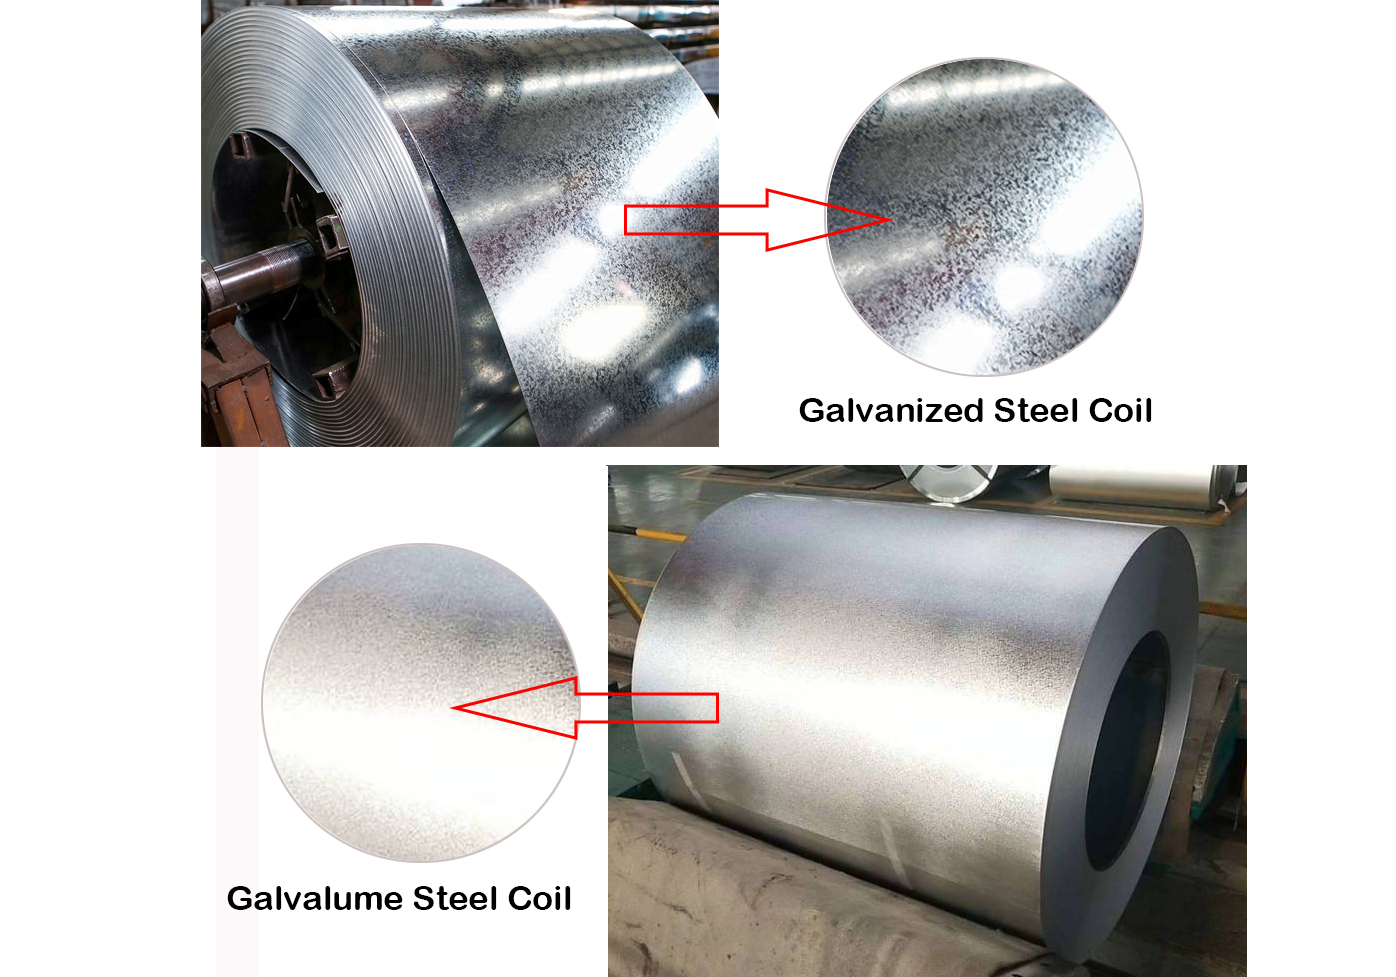 What is Better Galvanized or Galvalume